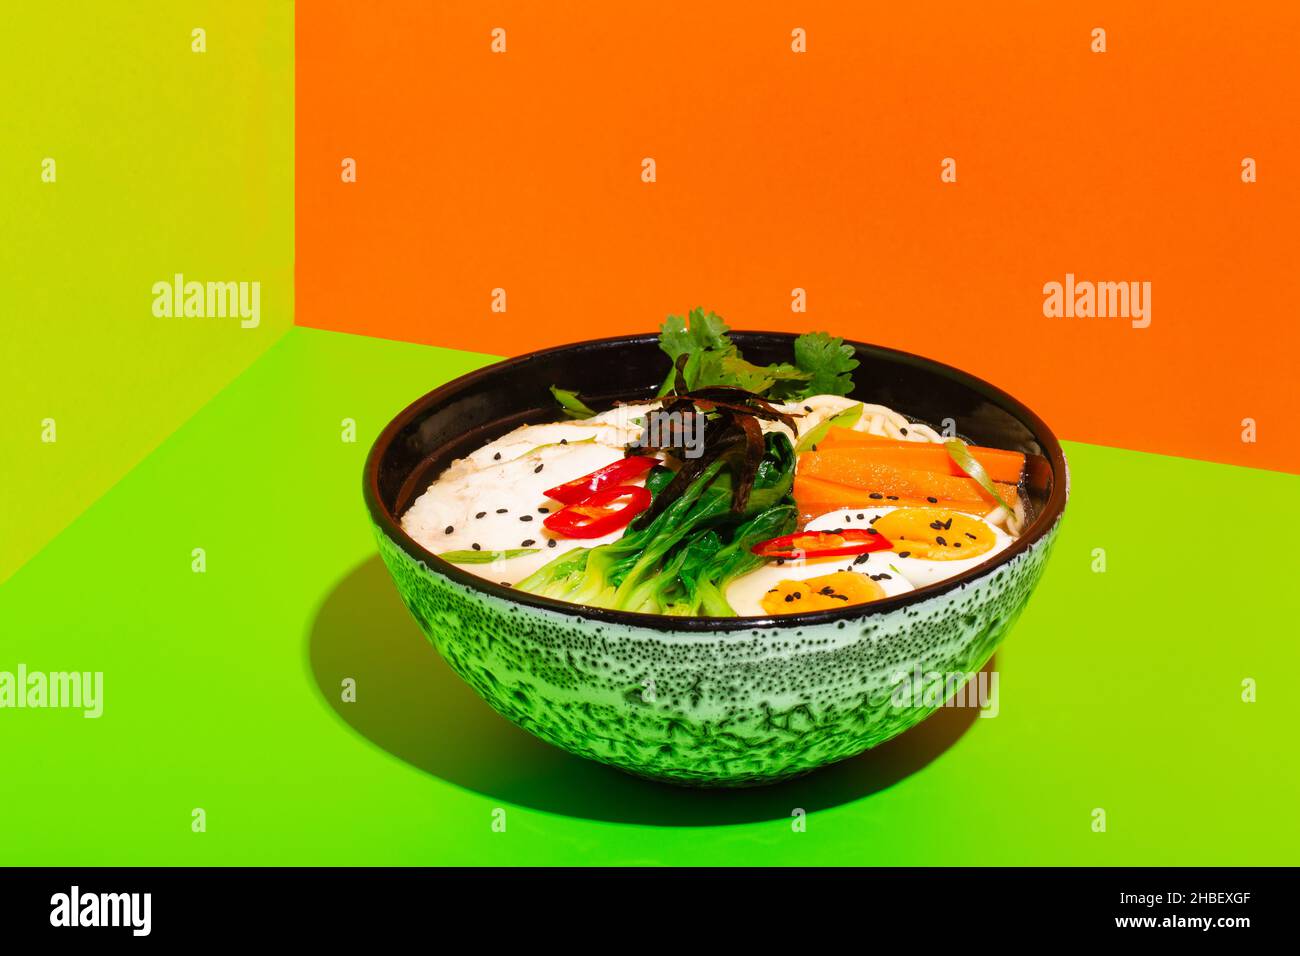 Ramen asian noodle in broth with Beef tongue meat, mushroom and pickled egg in bowl on green and orange background Stock Photo